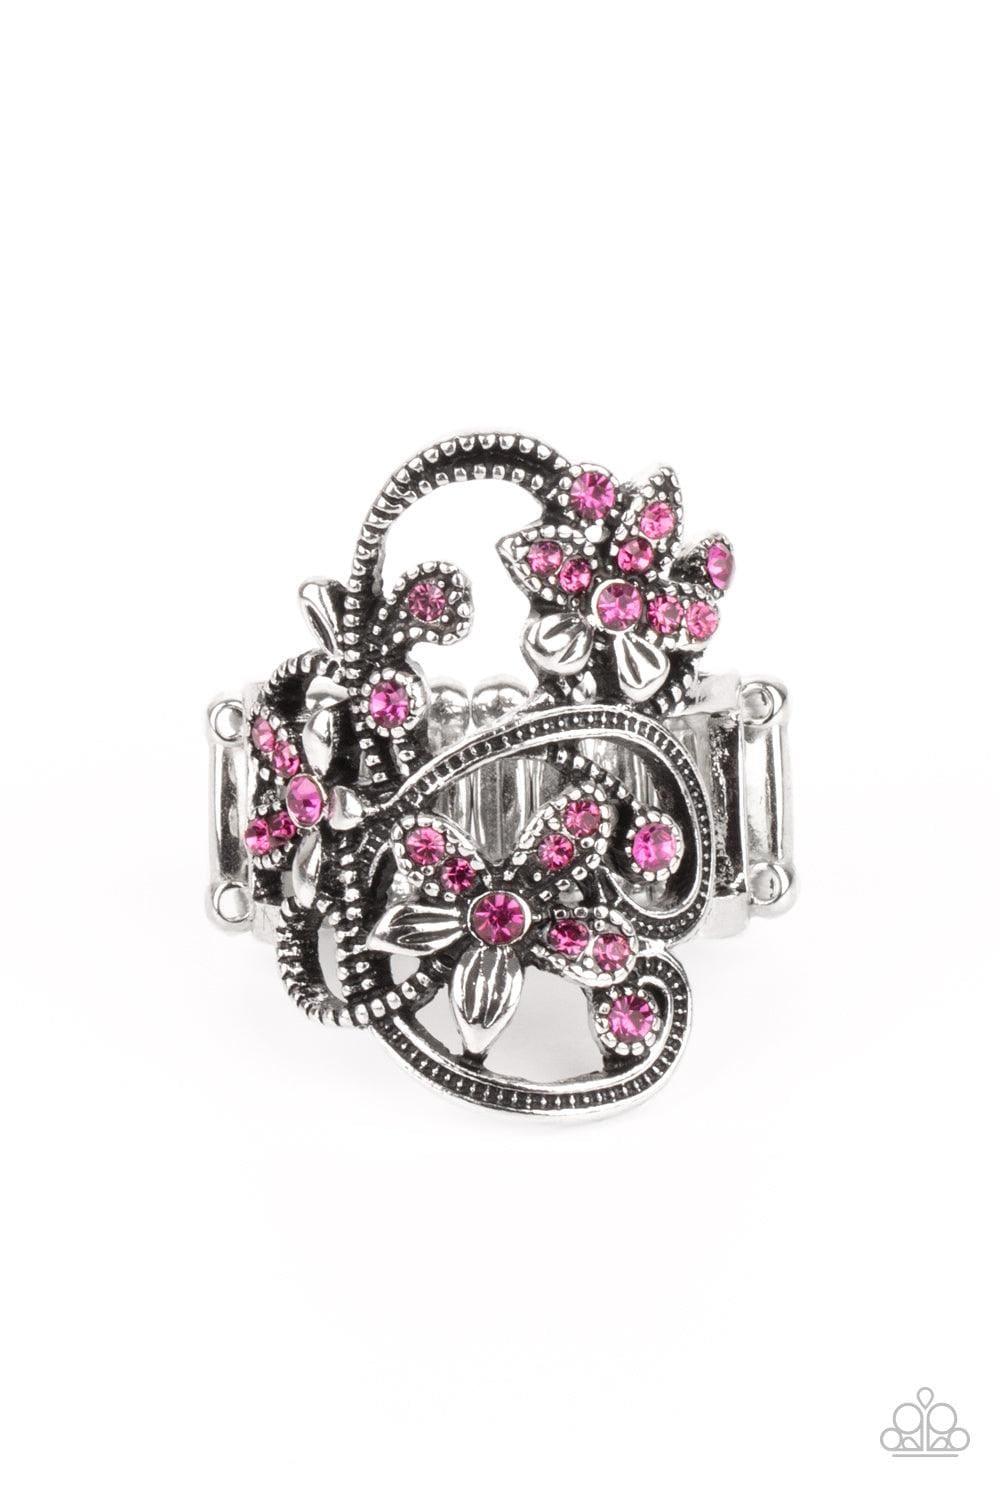 Paparazzi Accessories - Bouquet Toss - Pink Ring - Bling by JessieK